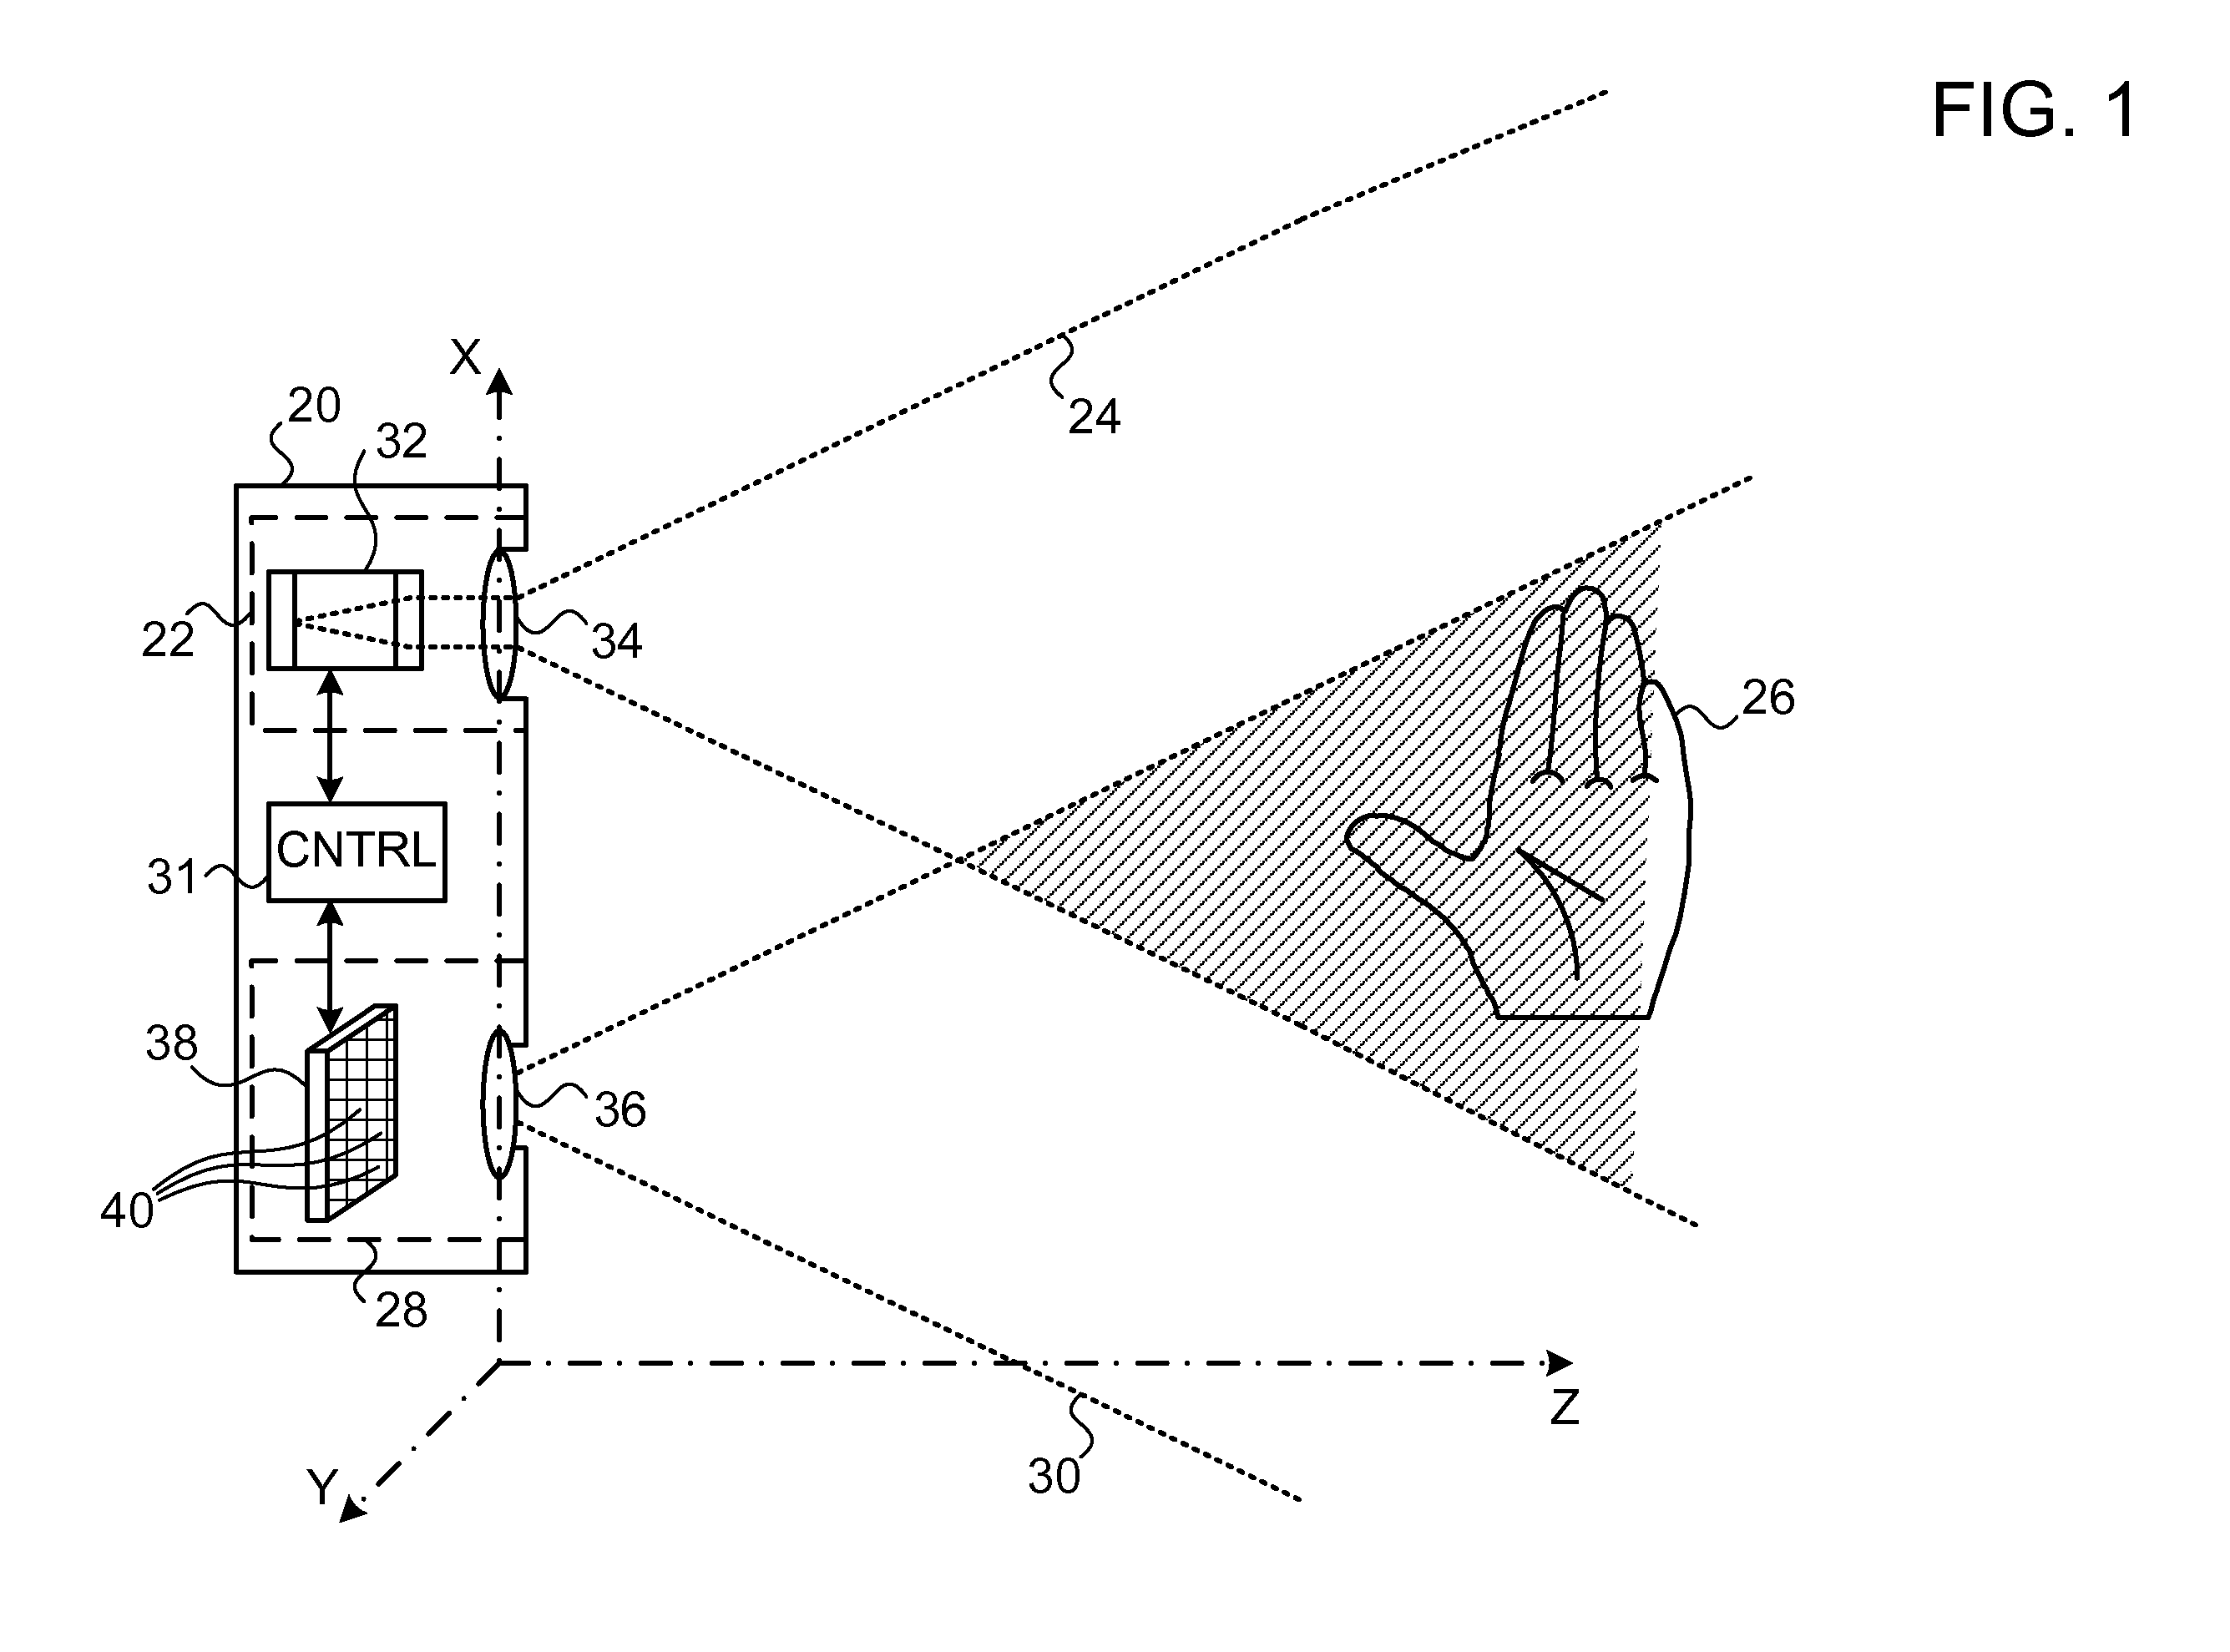 Synchronization of projected illumination with rolling shutter of image sensor